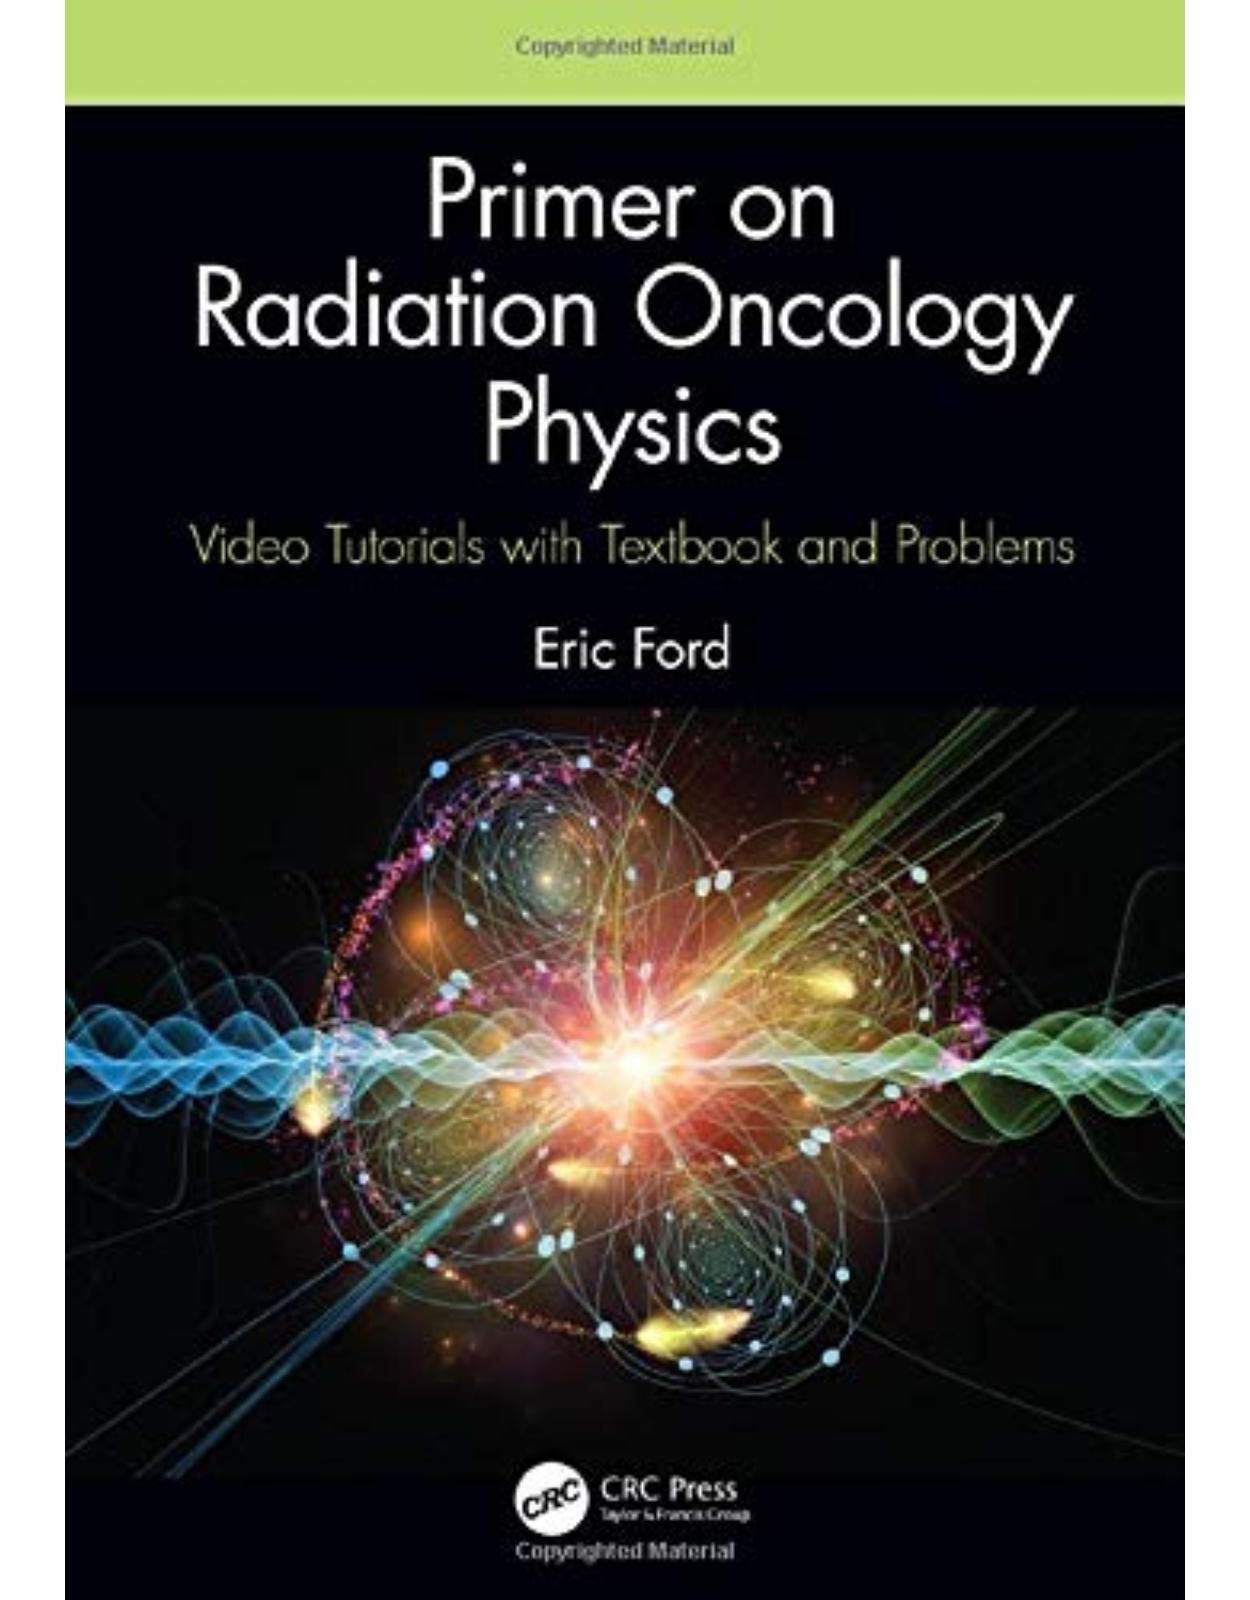 Primer on Radiation Oncology Physics Video Tutorials with Textbook and Problems